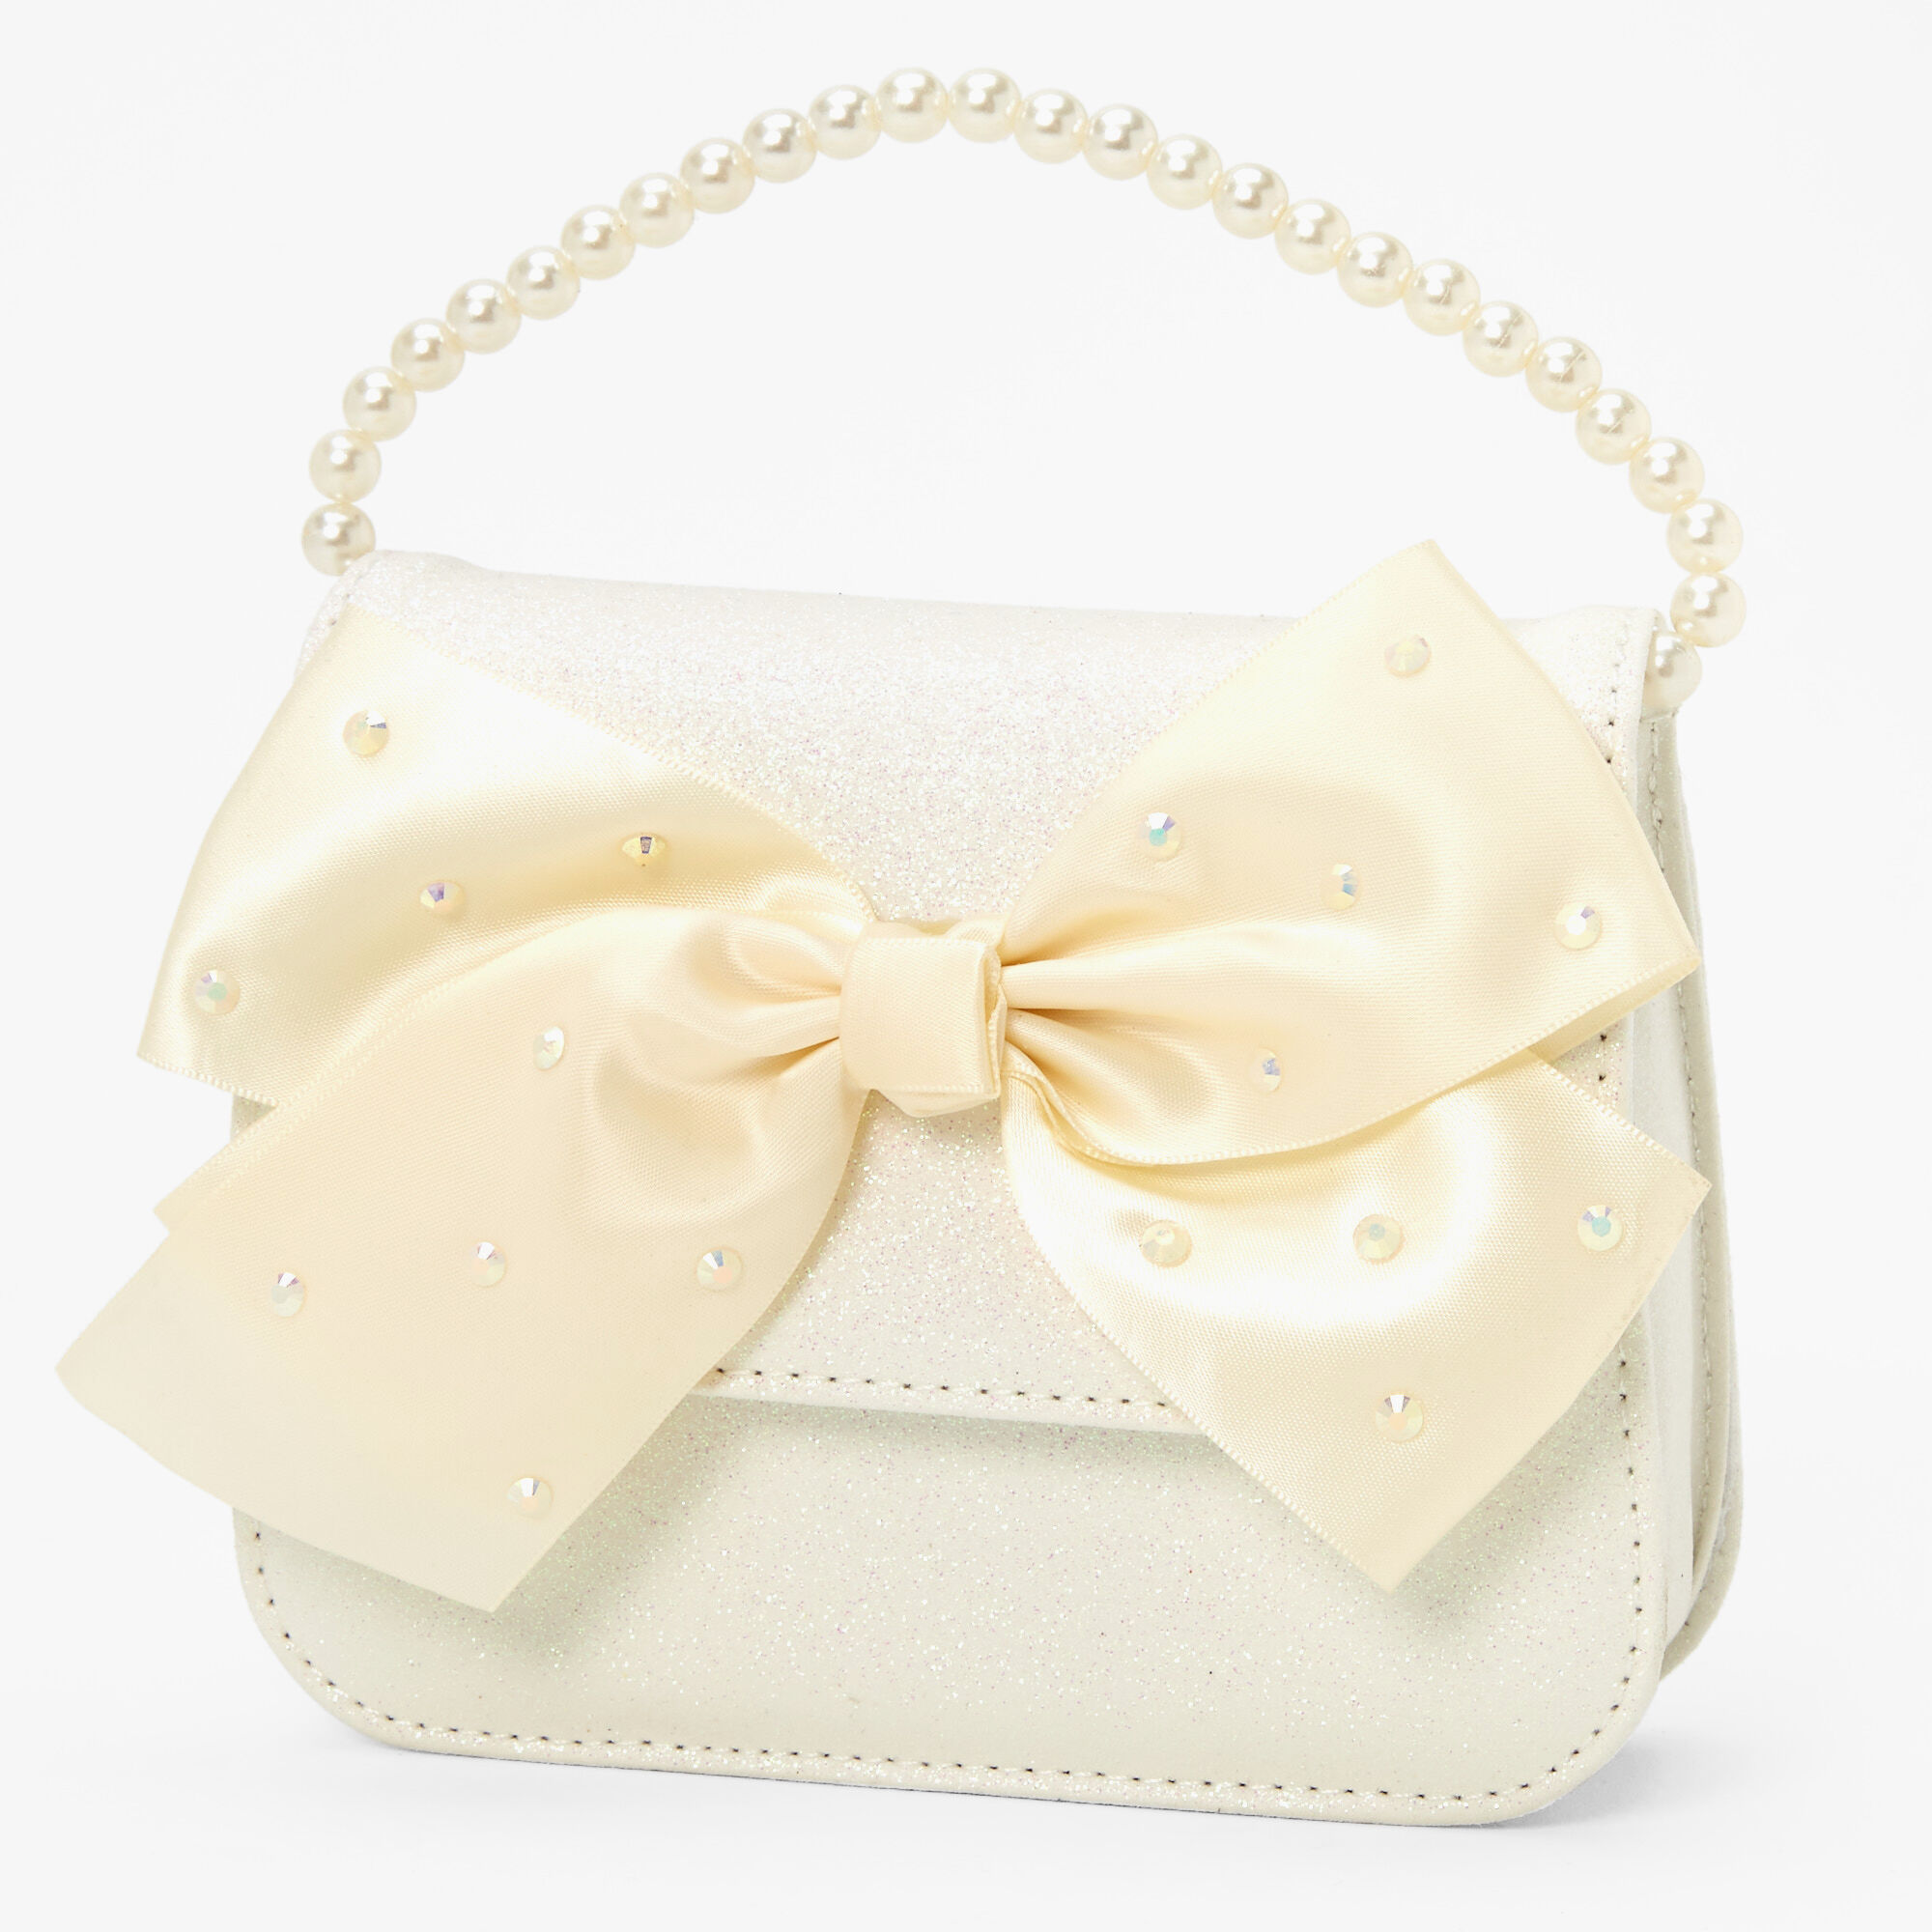 View Claires Club Special Occasion Big Bow Handbag Ivory information